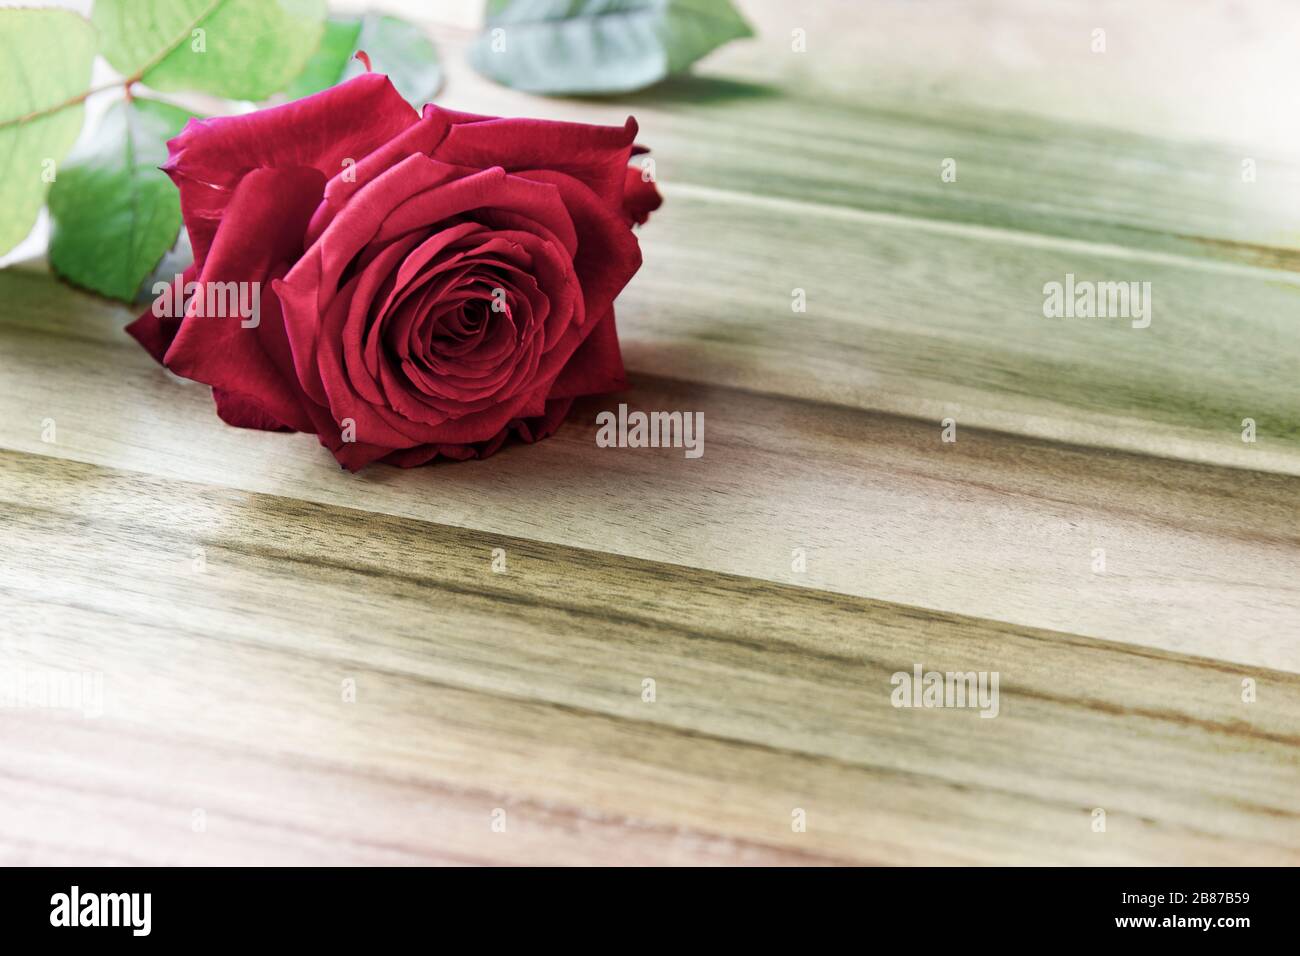 Wonderful red Rose (Rosaceae) lies on a wooden plate, with copy space. Germany Stock Photo